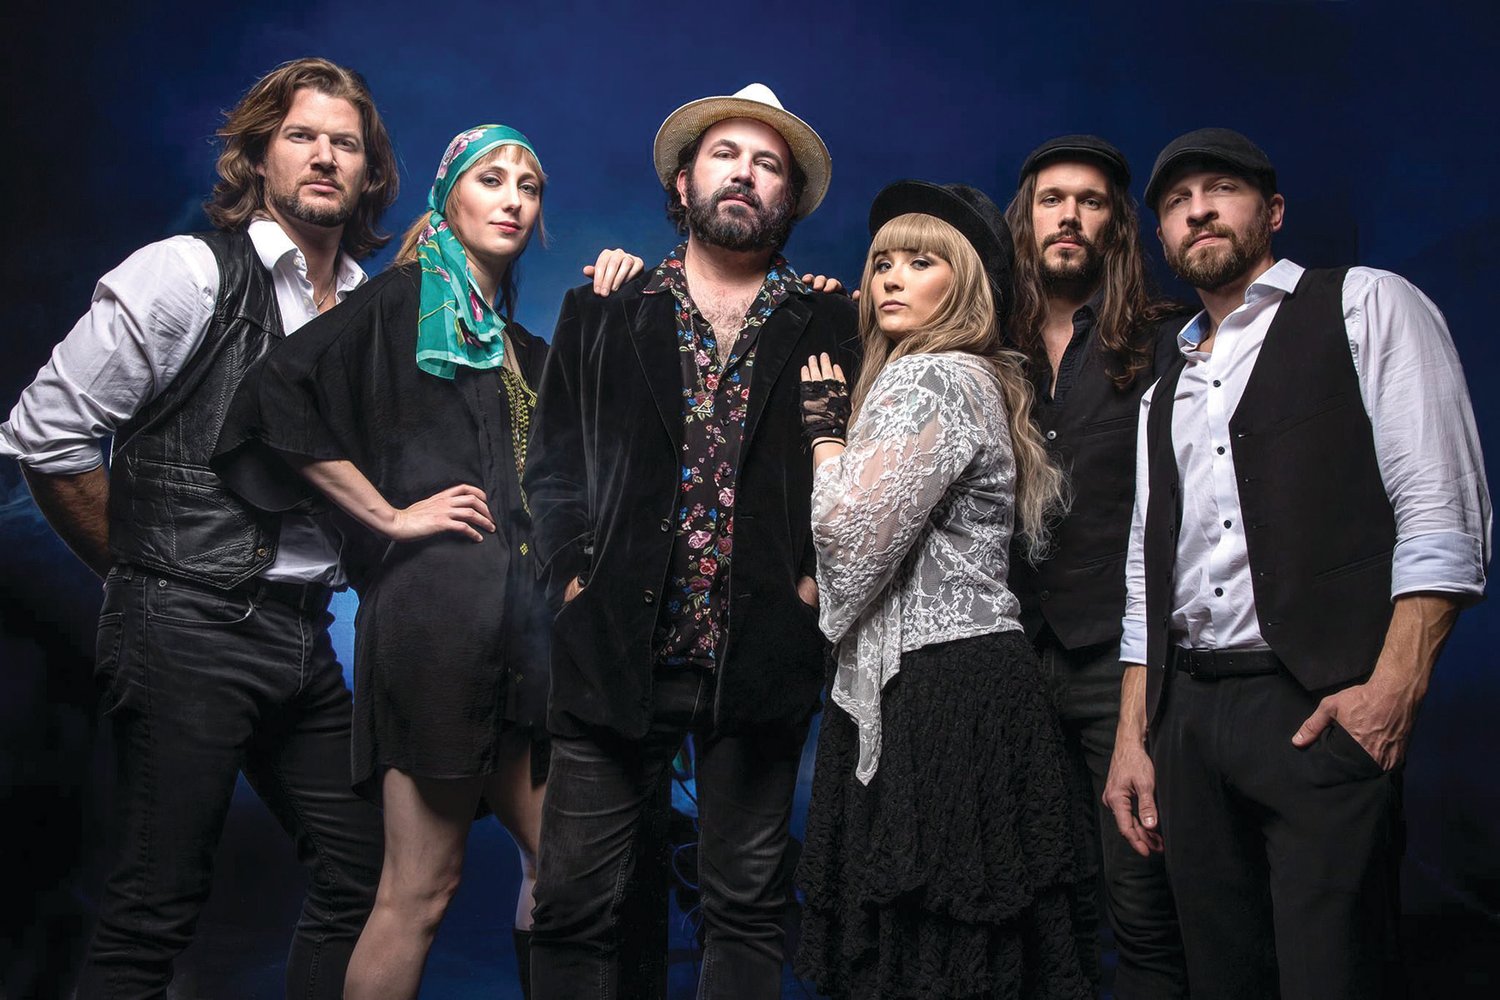 Featuring lead singer Mekenzie Jackson as Stevie Nicks, the Rumours band members include Alex Thrift, Doug Easterly, Adrienne Cottrell, Daniel Morrison, and Nick Whitson. Audiences can expect to hear songs like “Rhiannon,” “Stop Dragging my Heart Around,” and “Gypsy.”